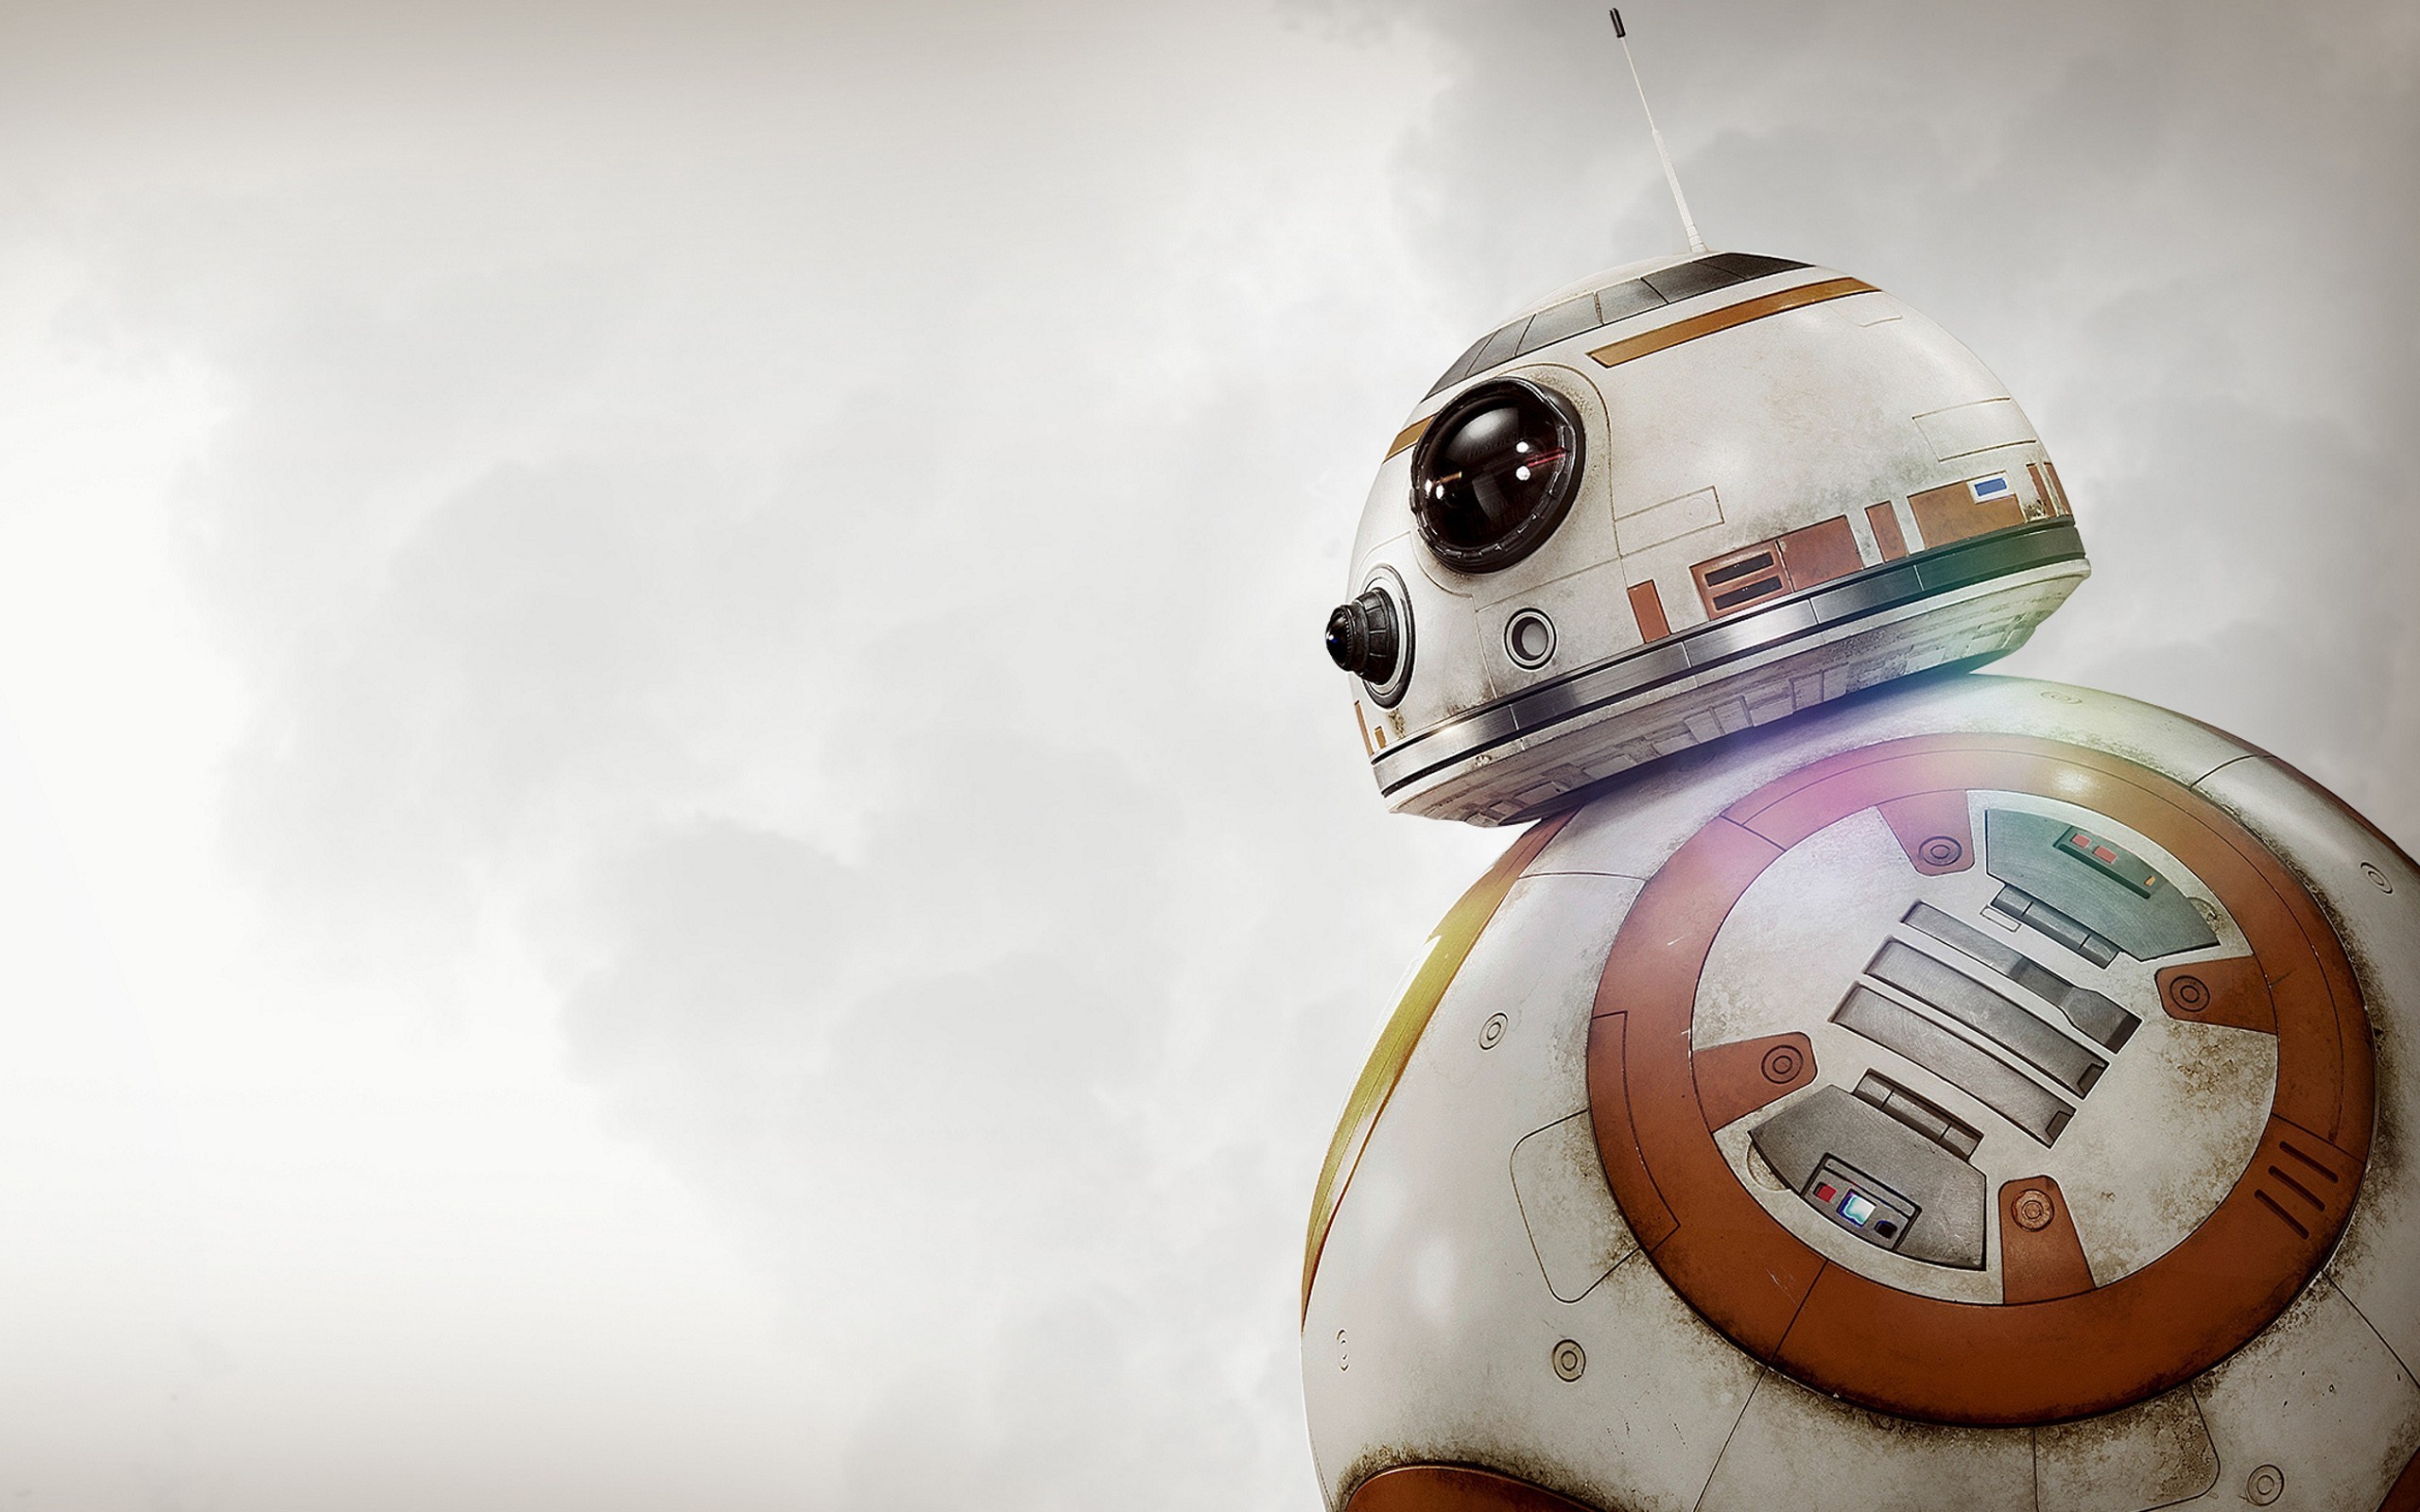 BB 8, Star Wars: The Force Awakens, Robot, Science Fiction, Star Wars